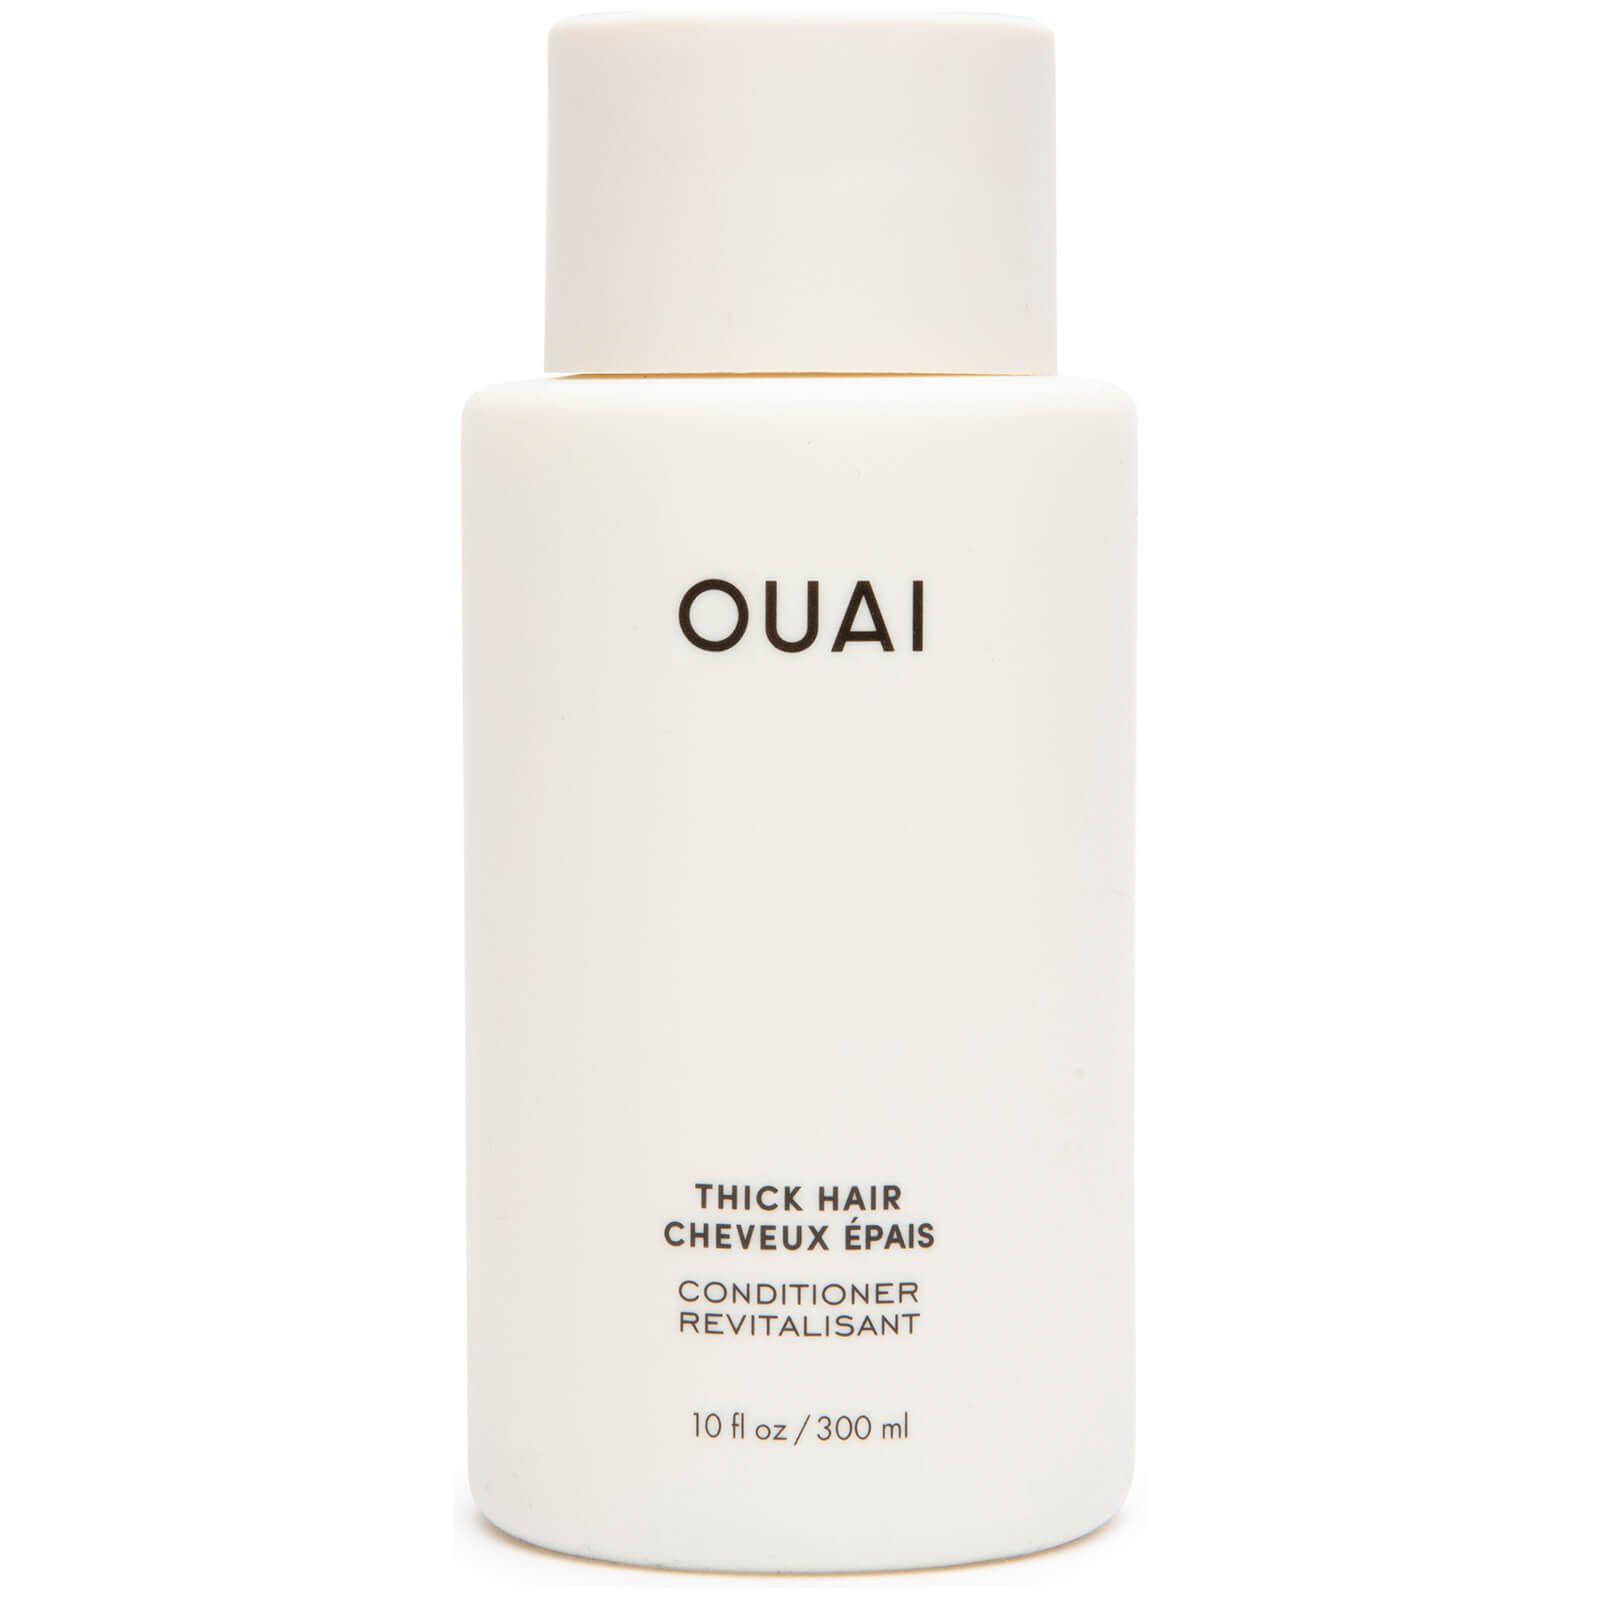 OUAI Thick Hair Conditioner 300ml | Cult Beauty (Global)